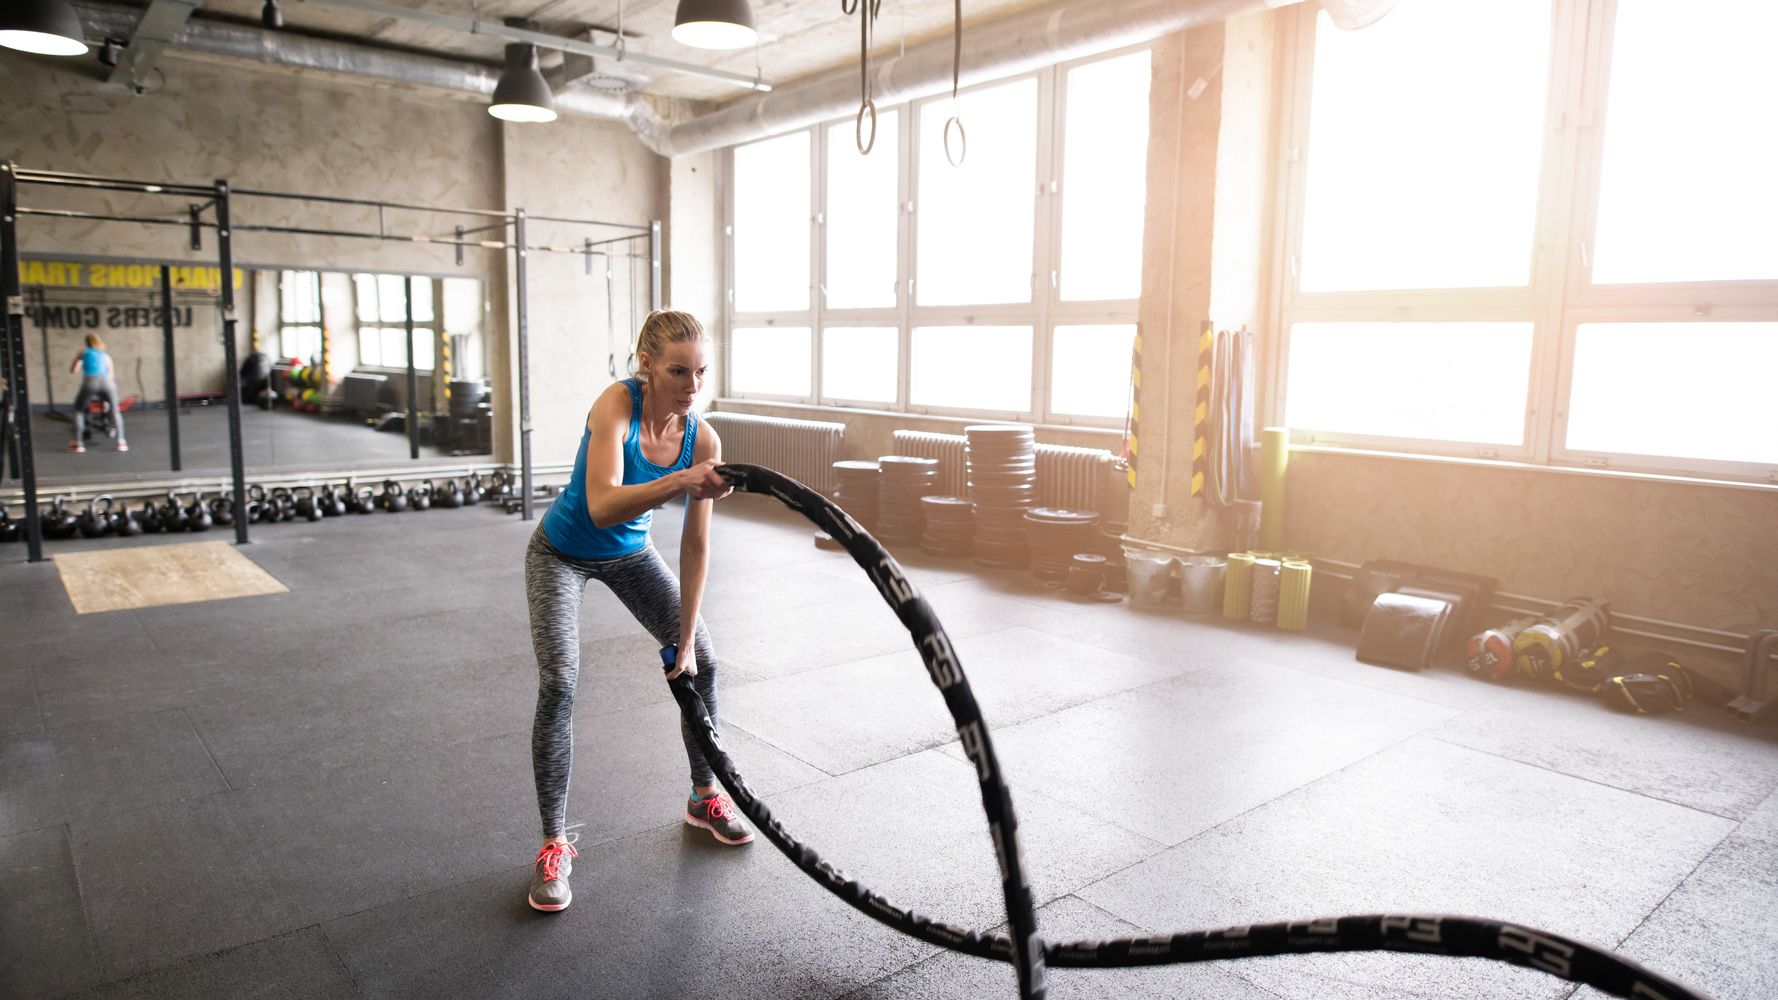 Battle Rope Workouts Are The New Gym Trend You Ll Want To